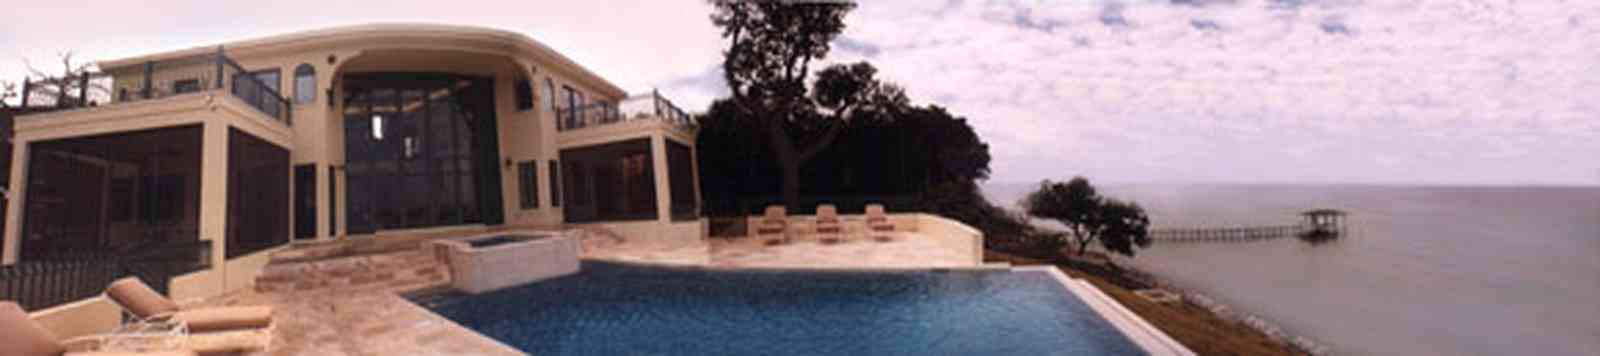 Gulf-Breeze:-Couch-Dreams_pool.jpg:  turret, dormer windows, pyramidal roofgulf coast, gulf of mexico, swimming pool, northern facade, swimming pool, marble decking